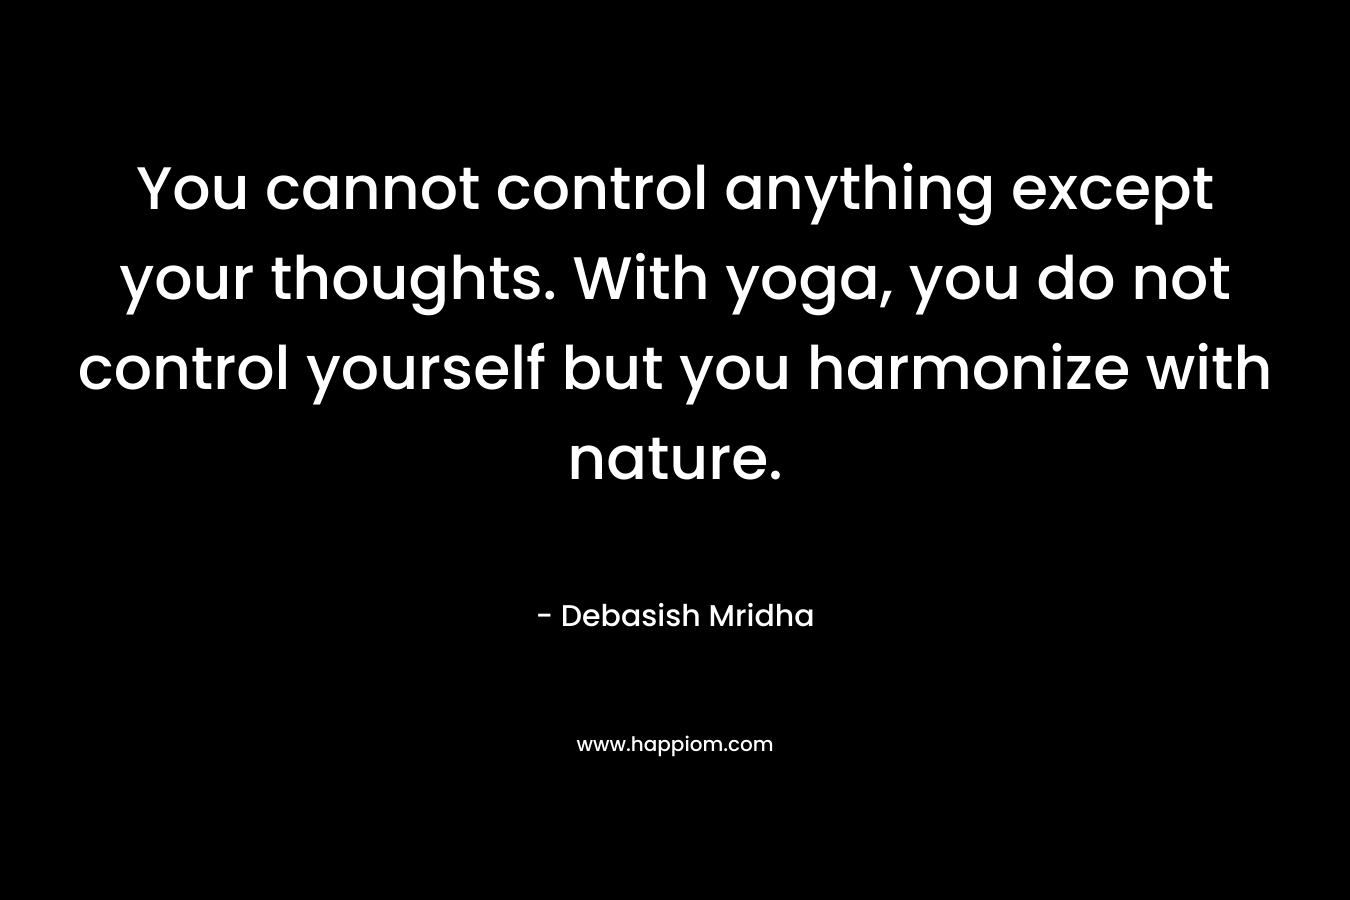 You cannot control anything except your thoughts. With yoga, you do not control yourself but you harmonize with nature. – Debasish Mridha